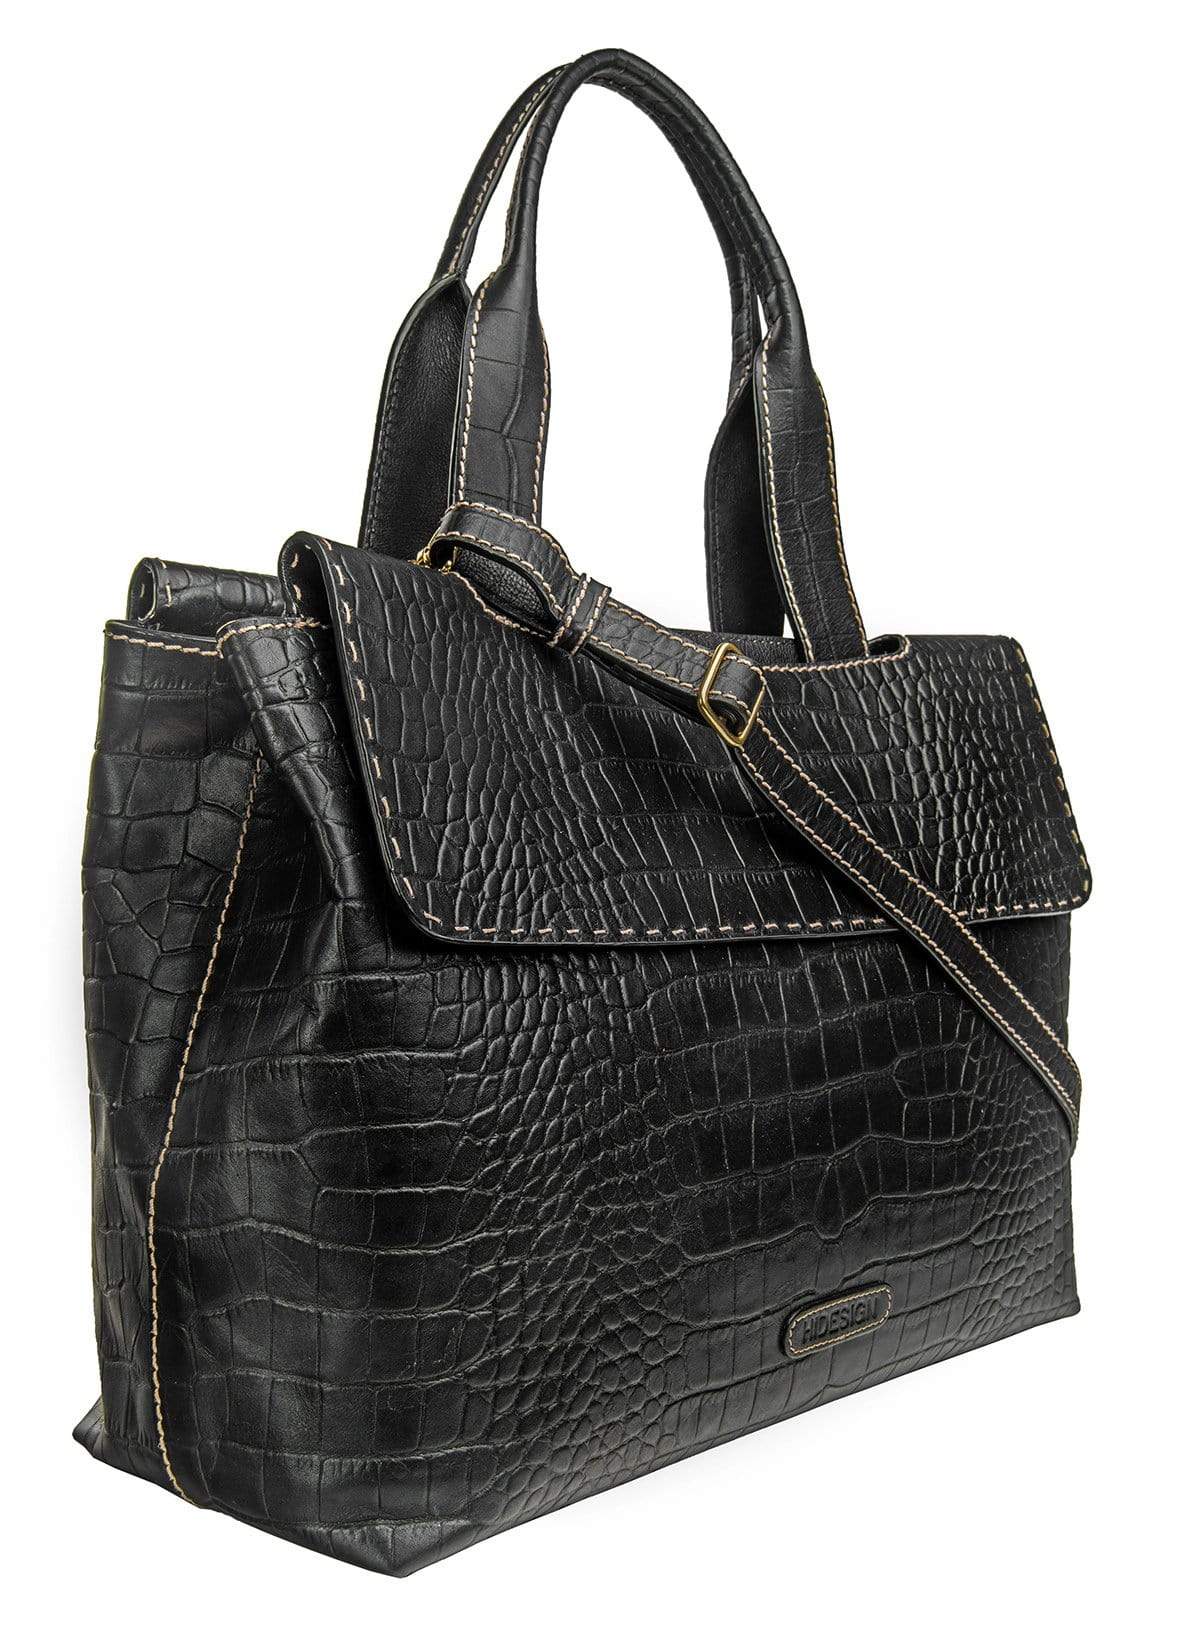  Hidesign: Women's Leather Bags